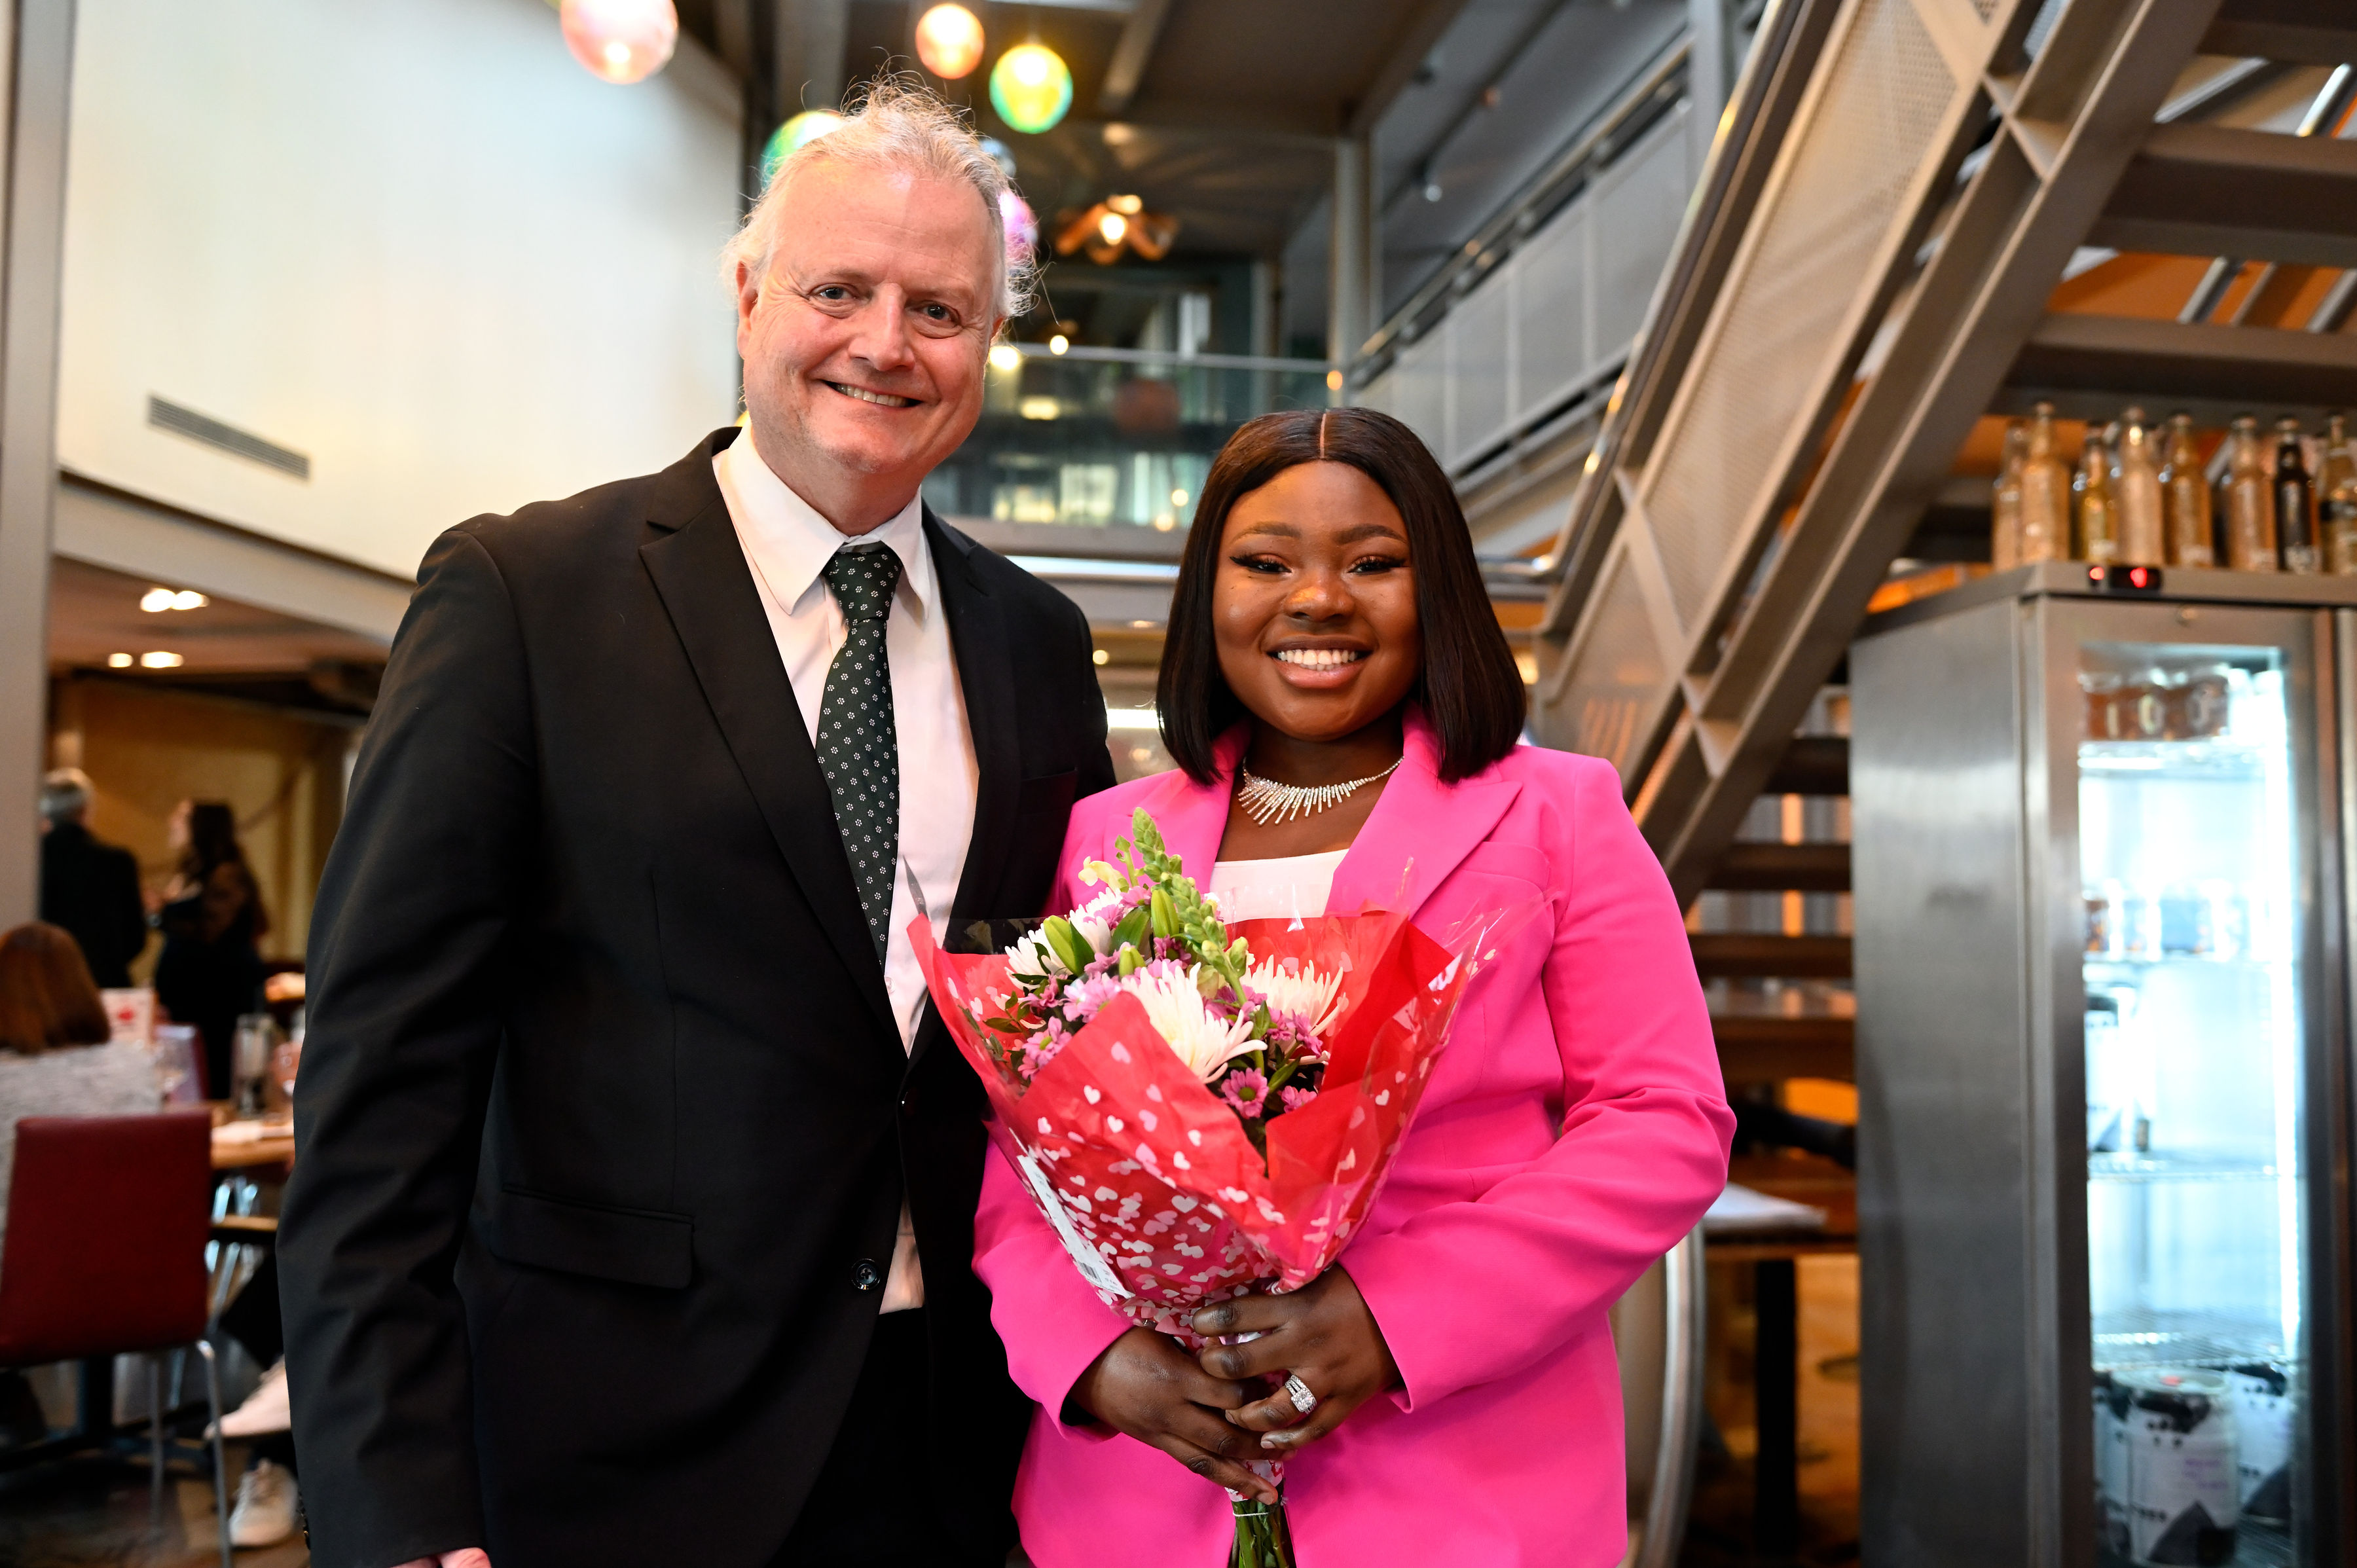 Prof Ken Oliphant, head of the University of Bristol Law School stood smiling next to a female law student prize wionner who is holding a bouquet of flowers and smiling.